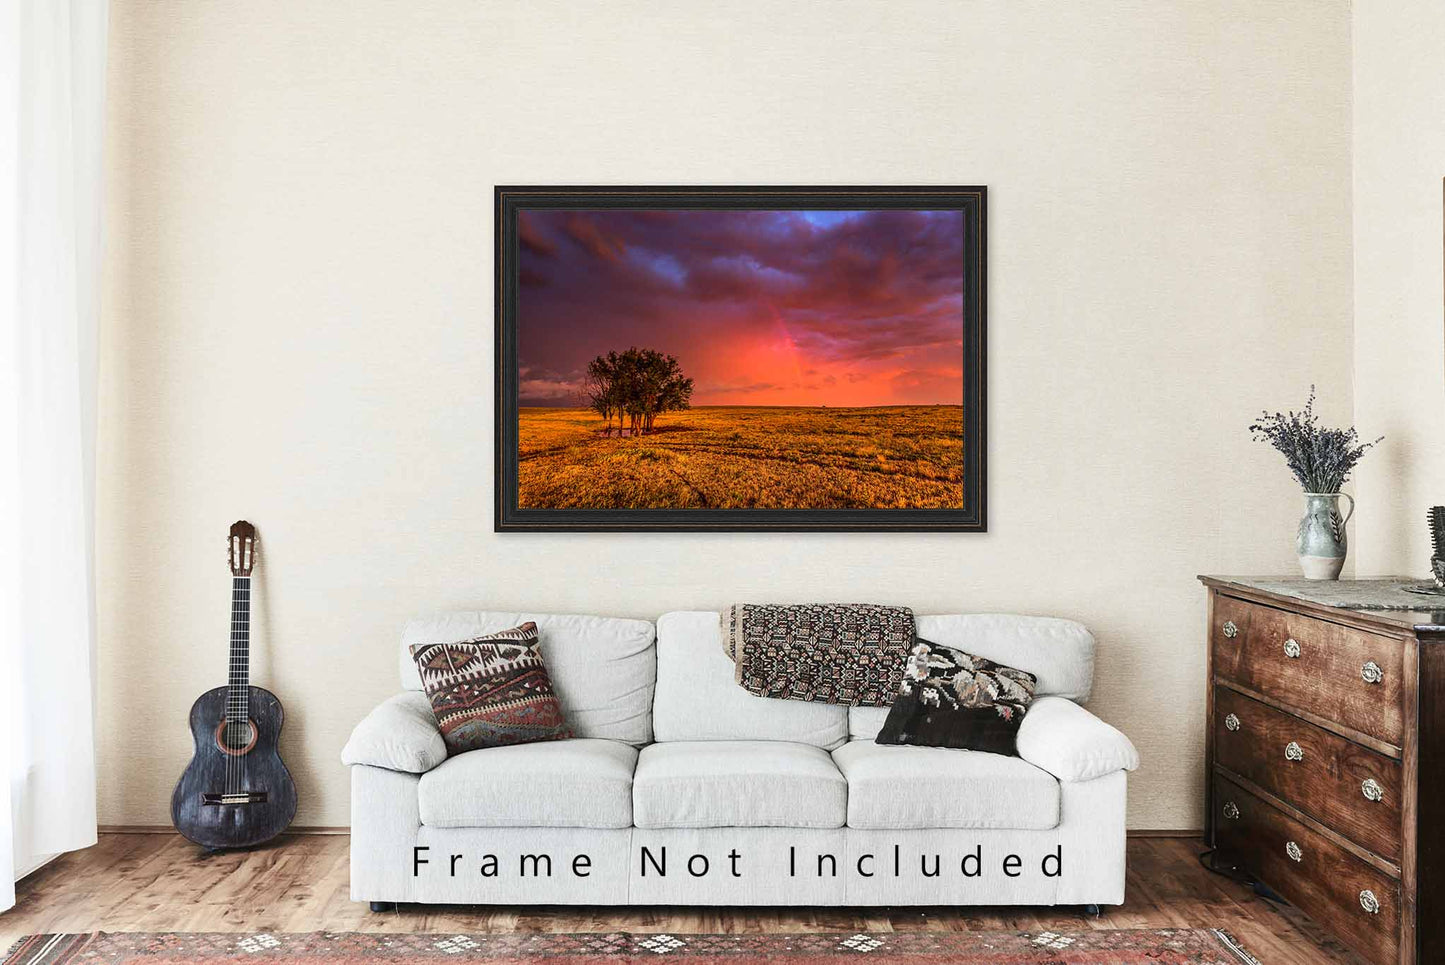 Prairie Picture - Photography Print of Trees and Rainbow in Dramatic Sky Over Open Plains in Oklahoma Western Landscape Wall Art Photo Decor